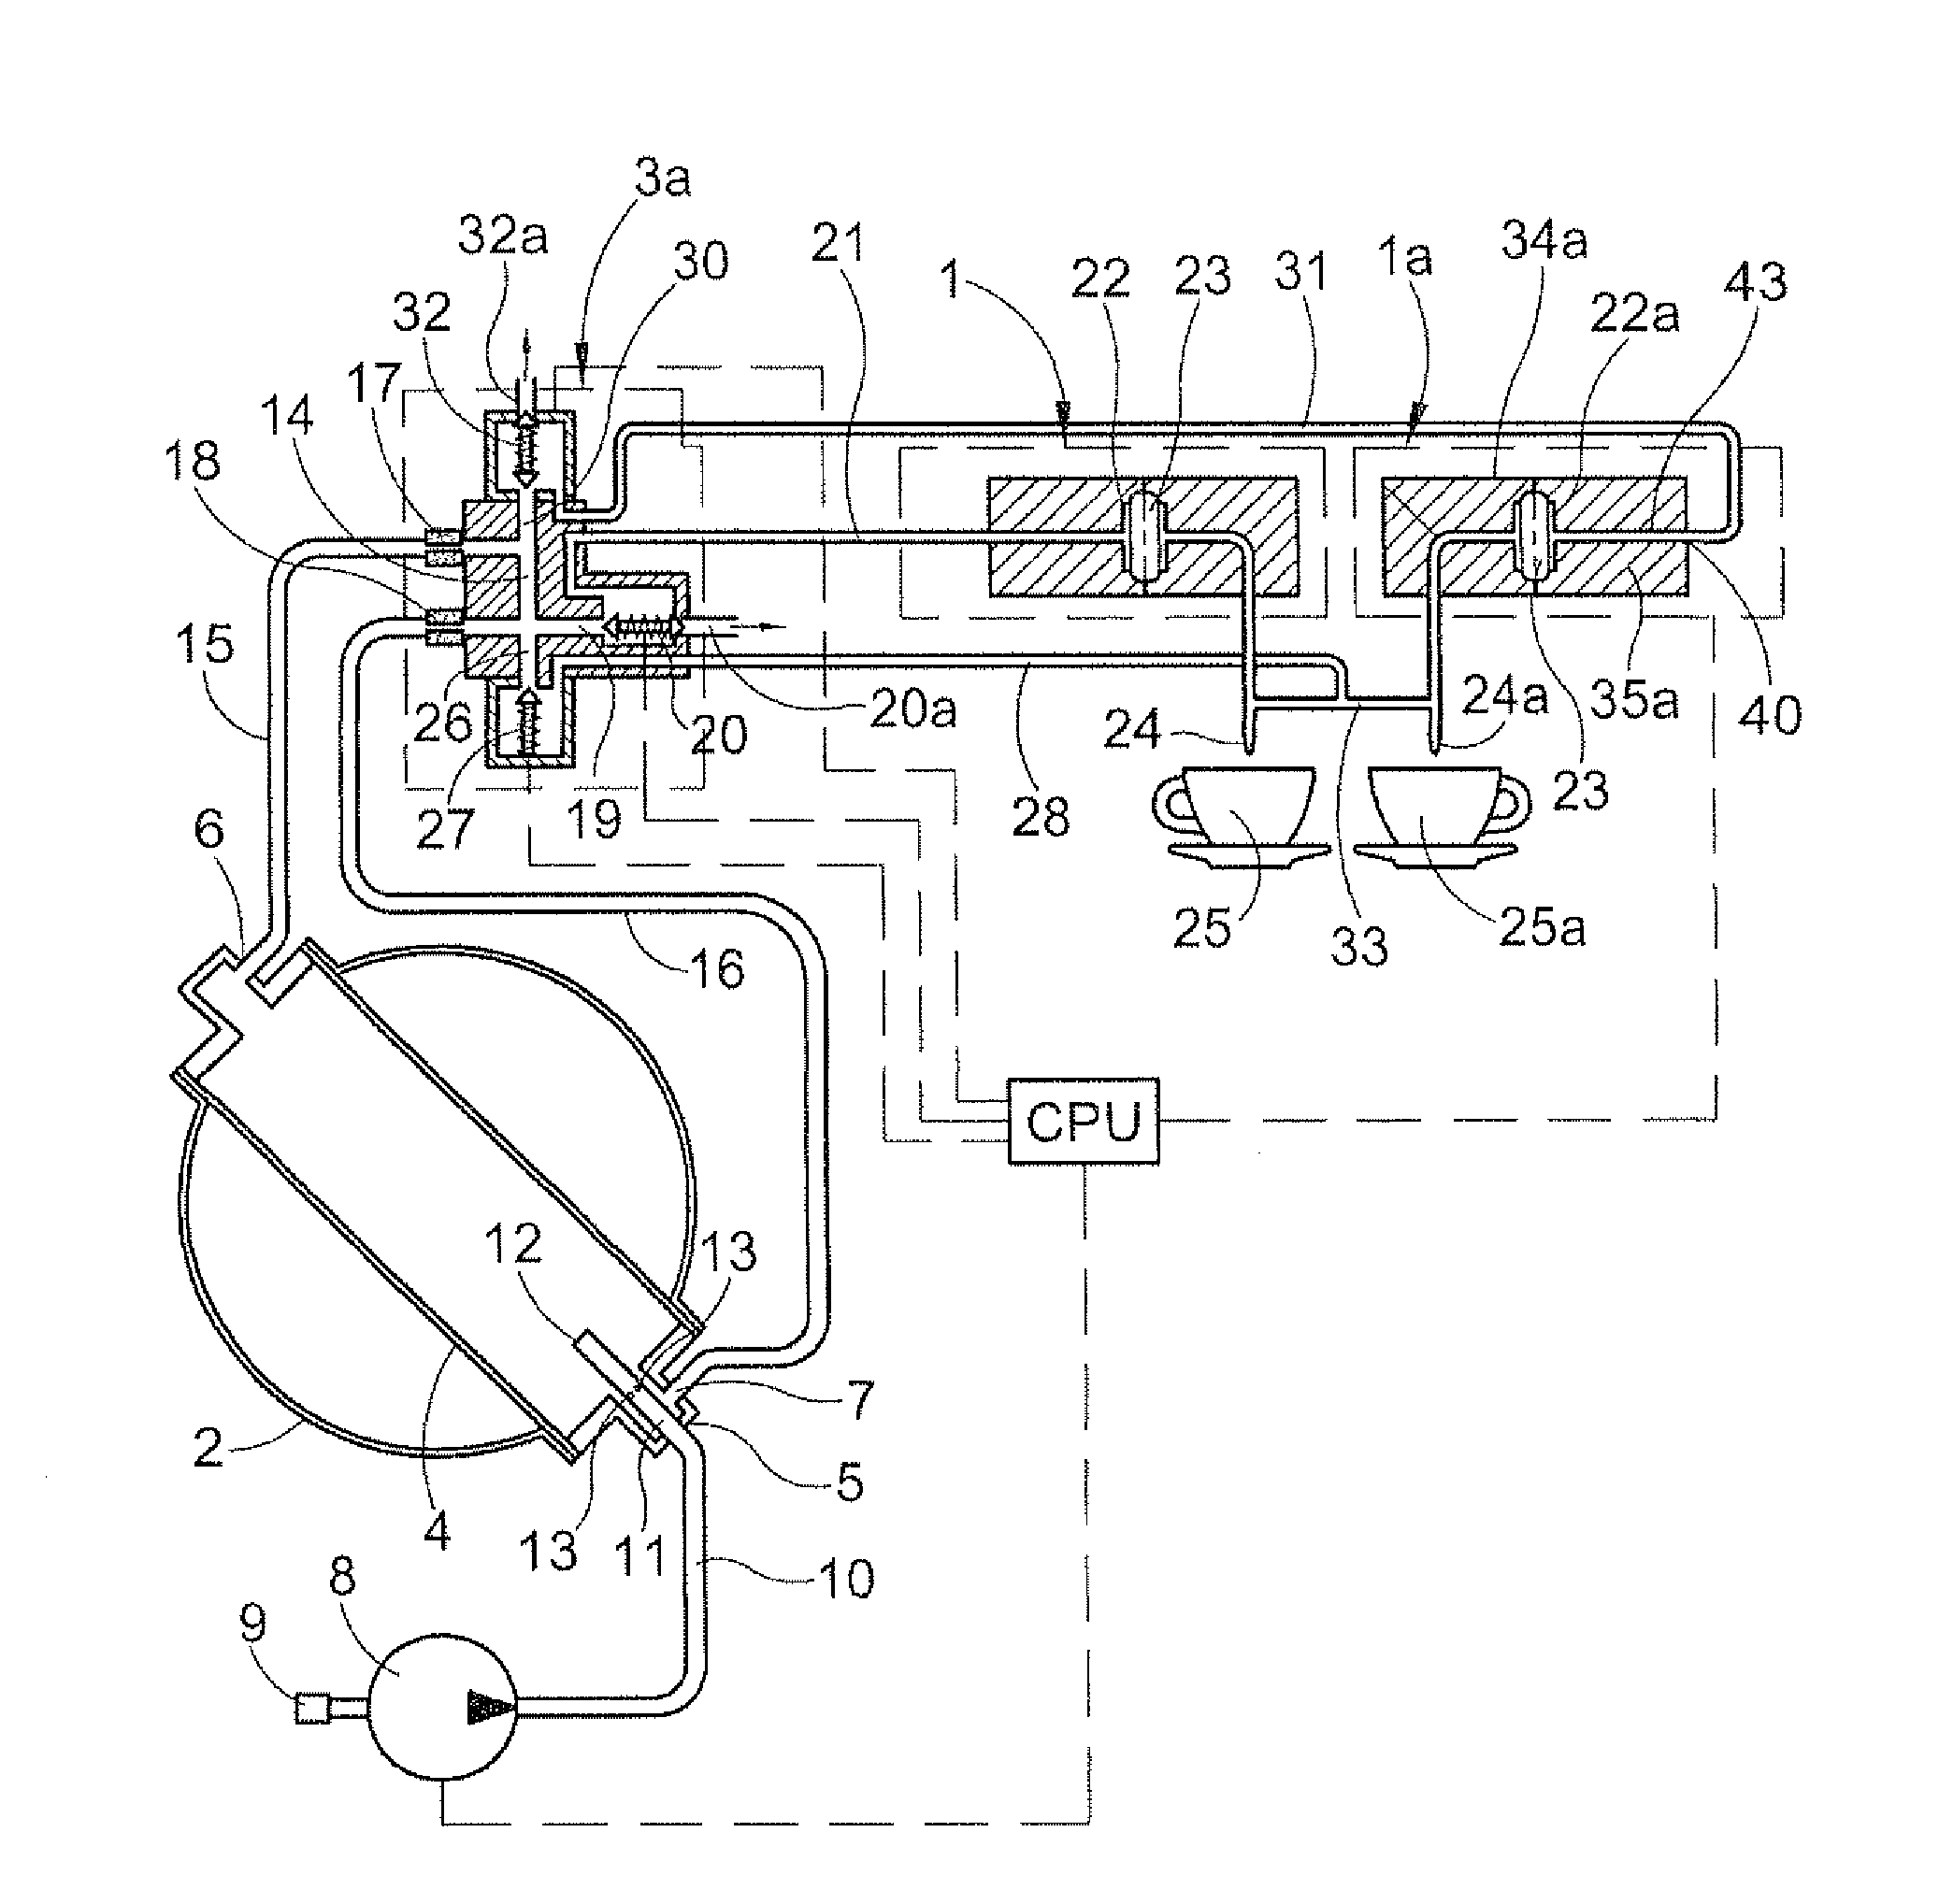 Apparatus for the preparation of coffee-based beverages from pre-packaged pods or capsules